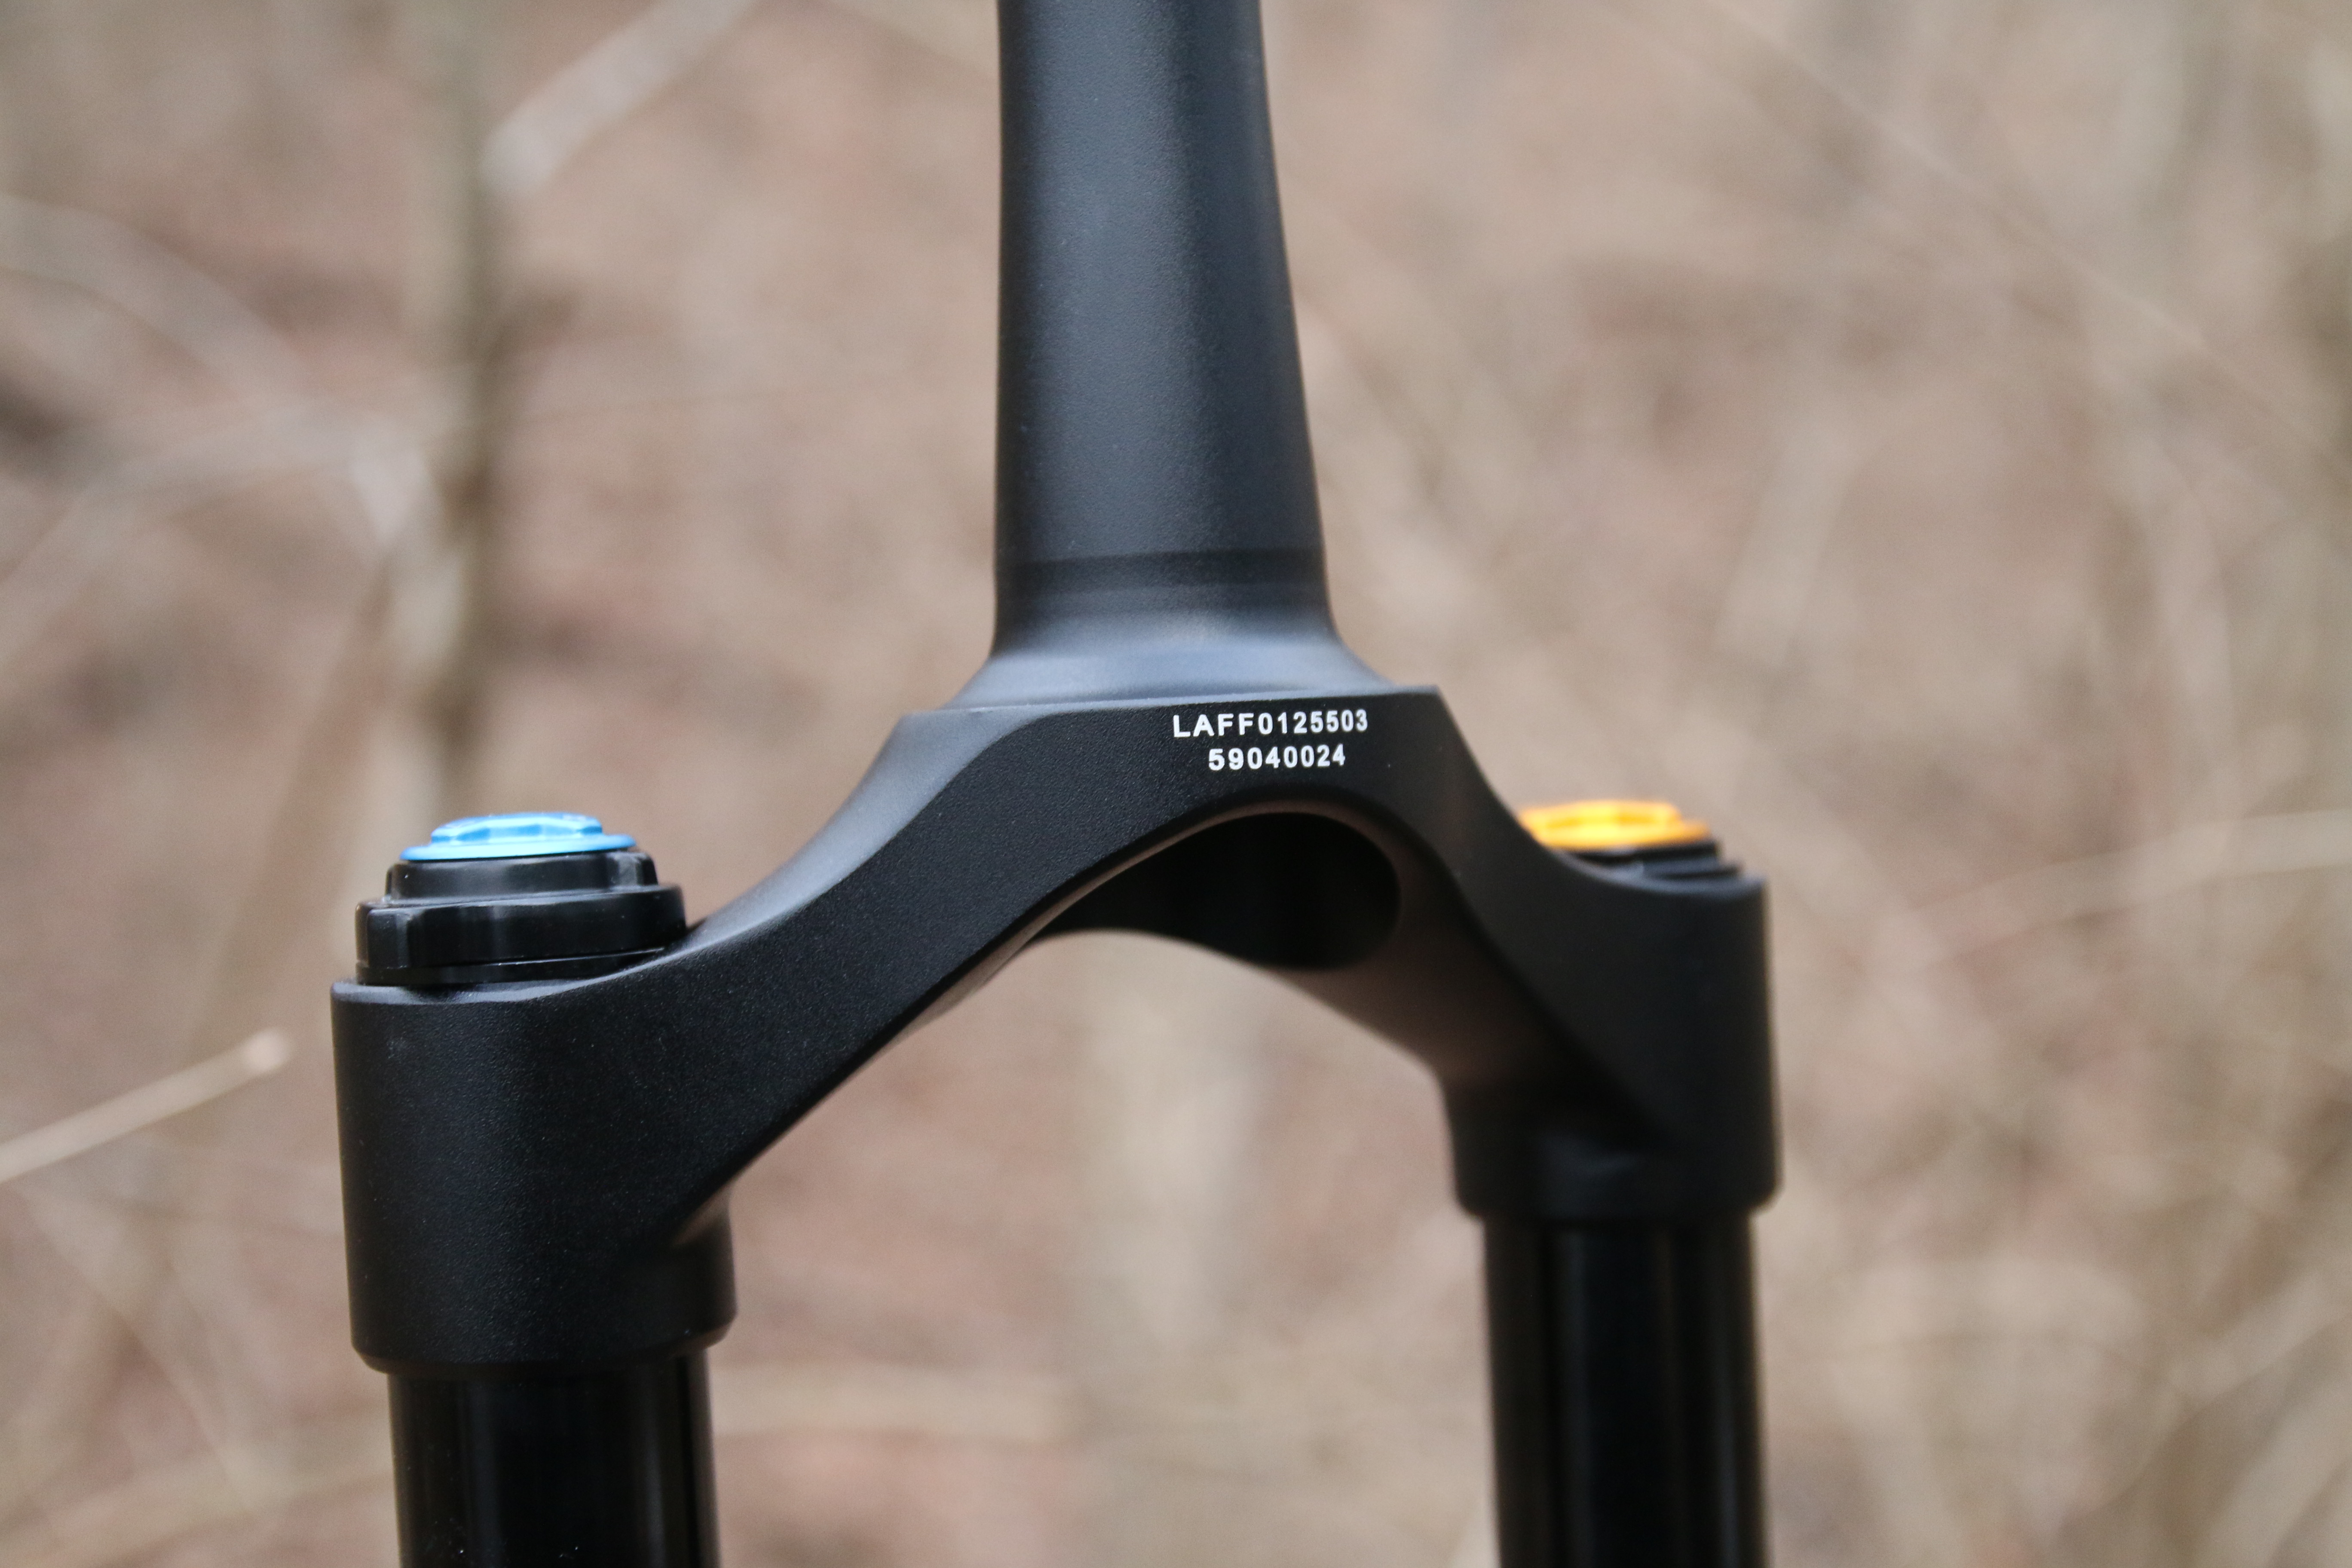 Hands On: The New Öhlins RXF 160mm 29er Suspension Fork w/ Actual Weights